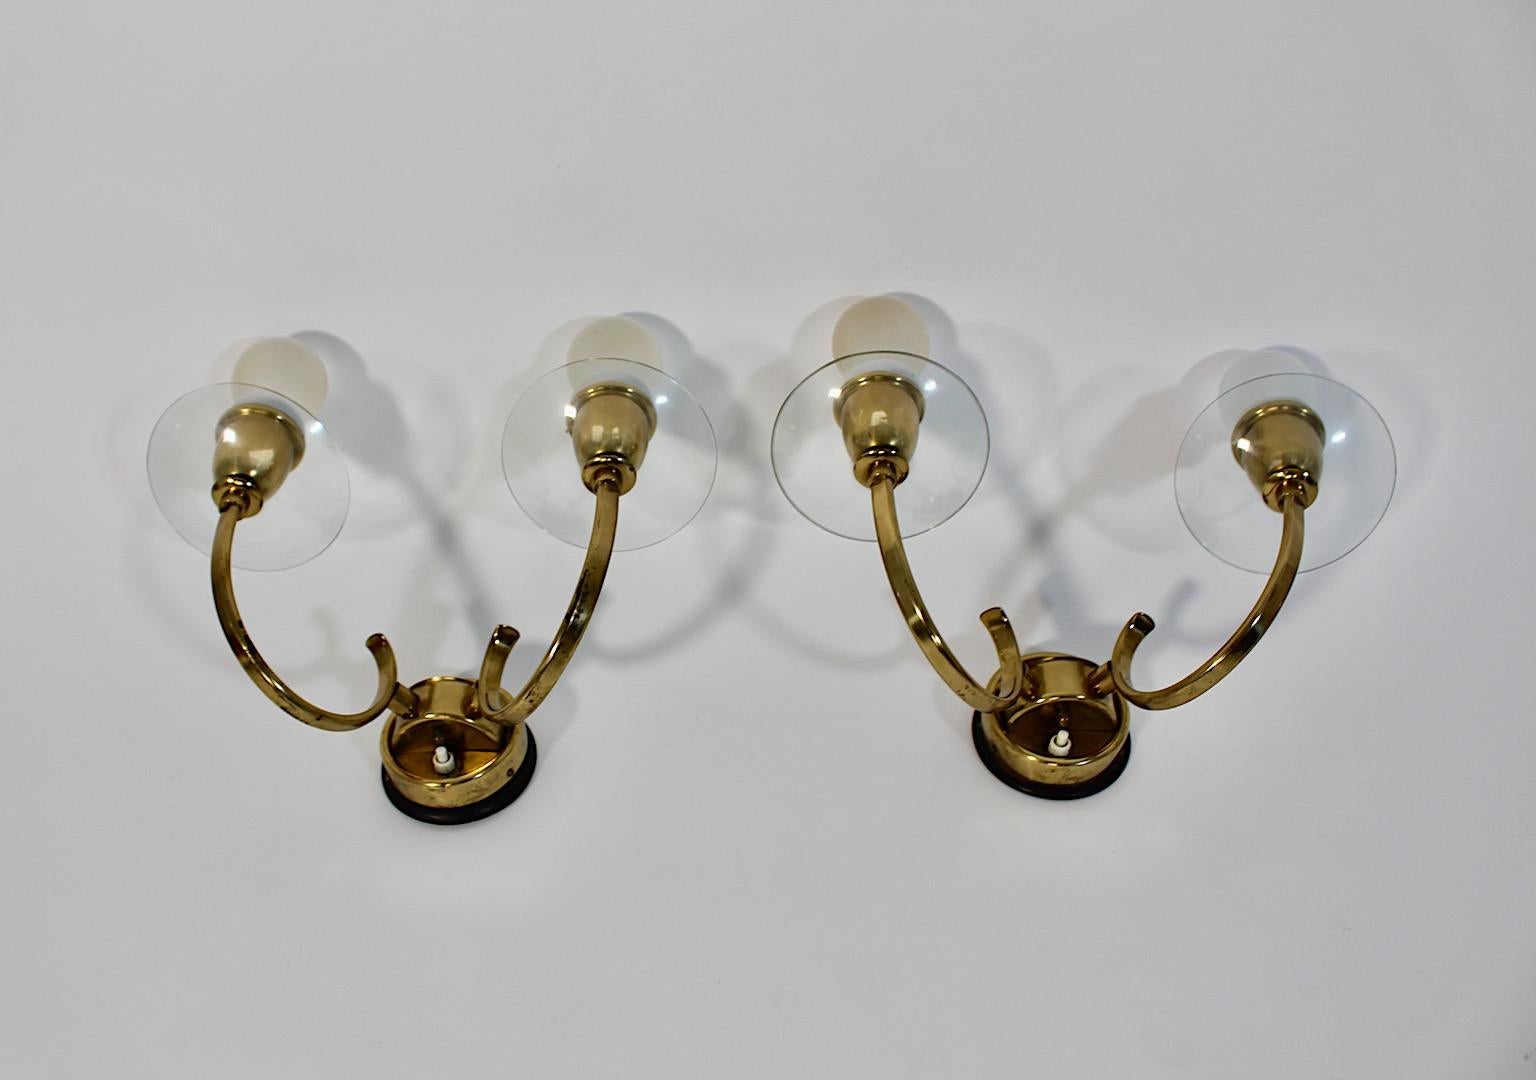 Mid Century Modern vintage pair duo sconces or wall lights from brass and glass 1950s Austria.
An amazing and elegant pair of sconces shows two arms with sockets E 27 
each with slightly curved and graceful glass plates and on/off button at the